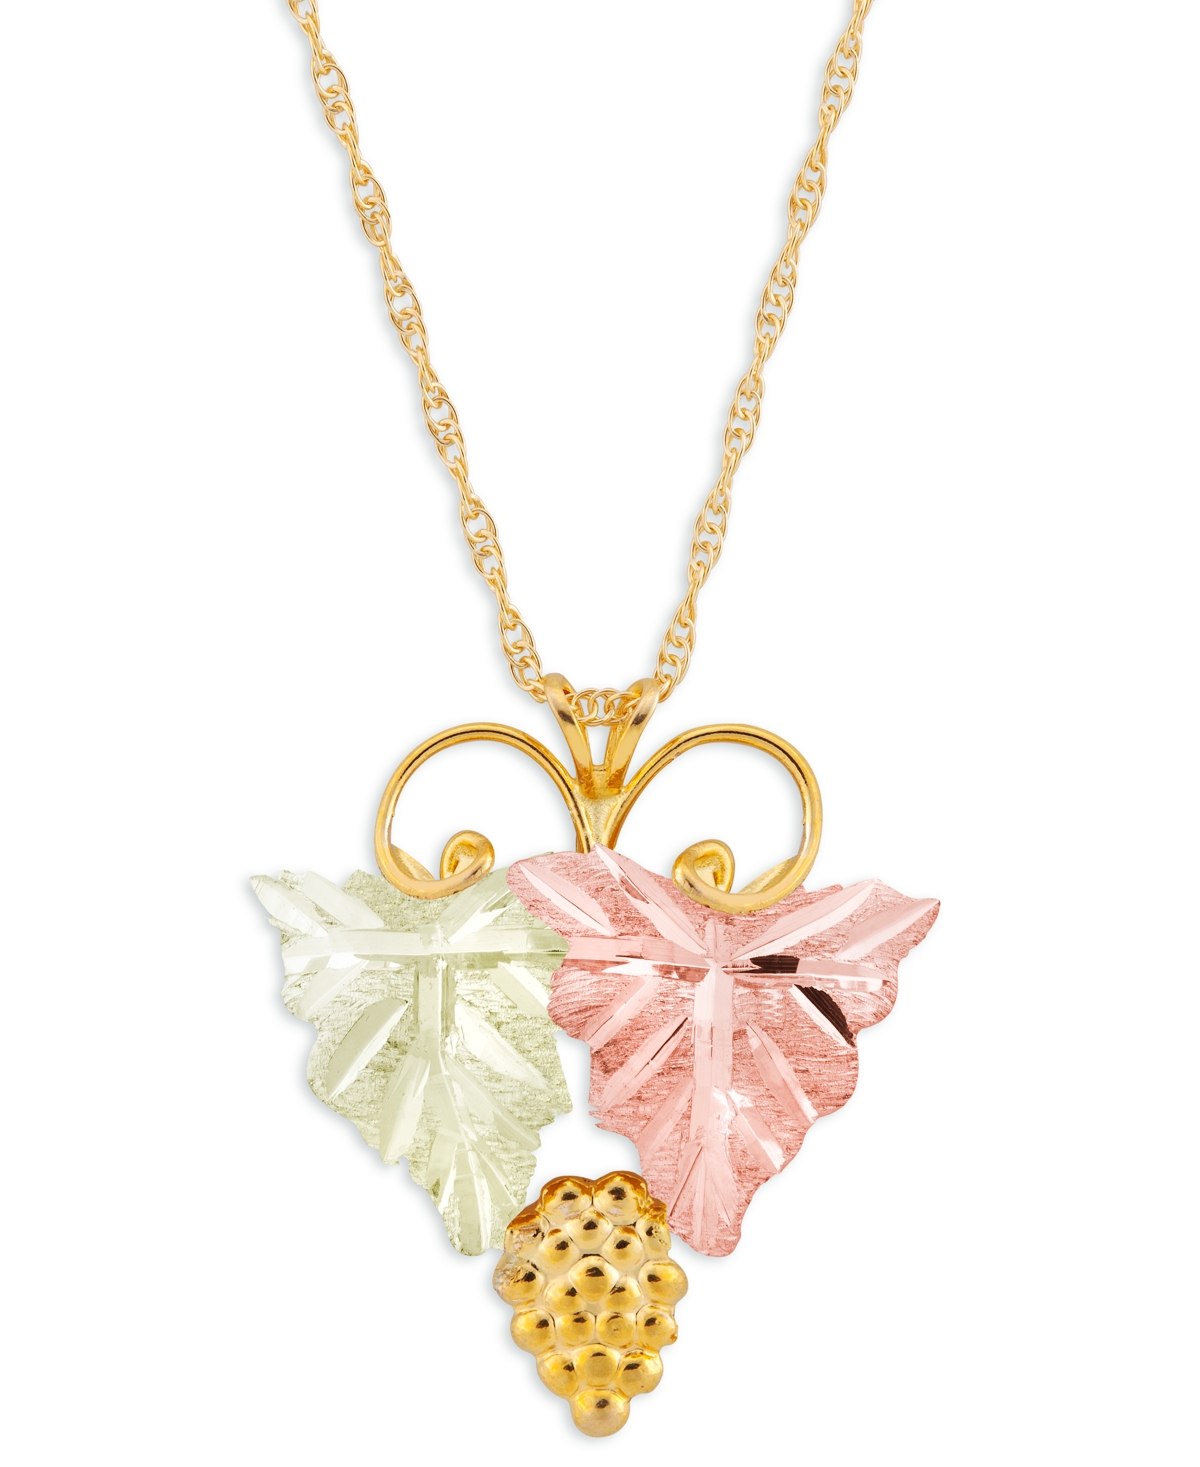 Grape and Leaf Pendant in 10k Yellow Gold with 12k Rose and Green Gold - Mlti Gold